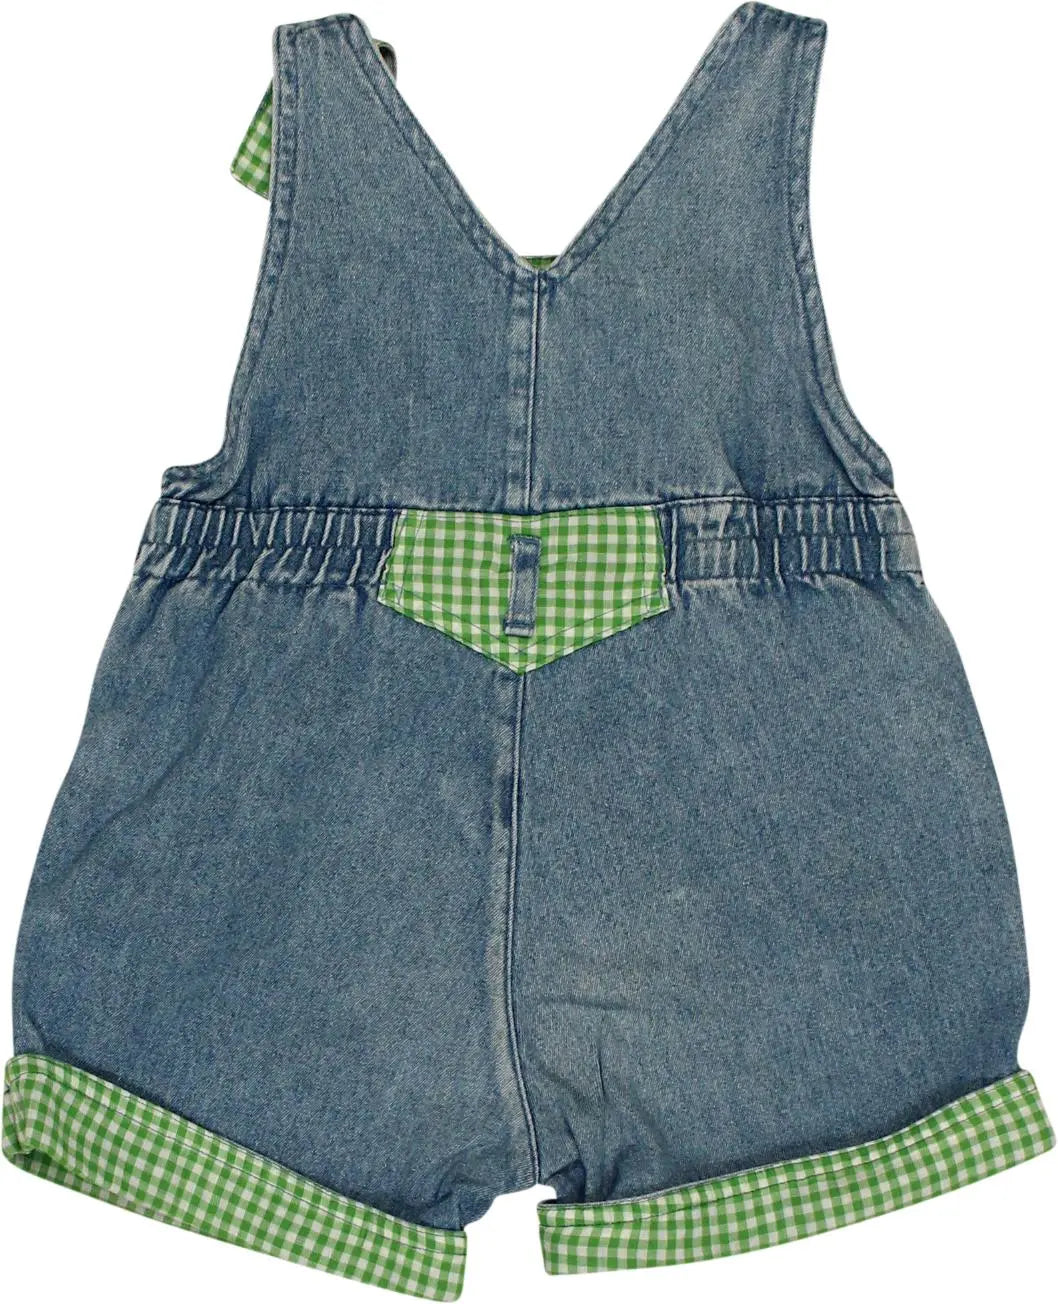 Unknown - Dungarees- ThriftTale.com - Vintage and second handclothing